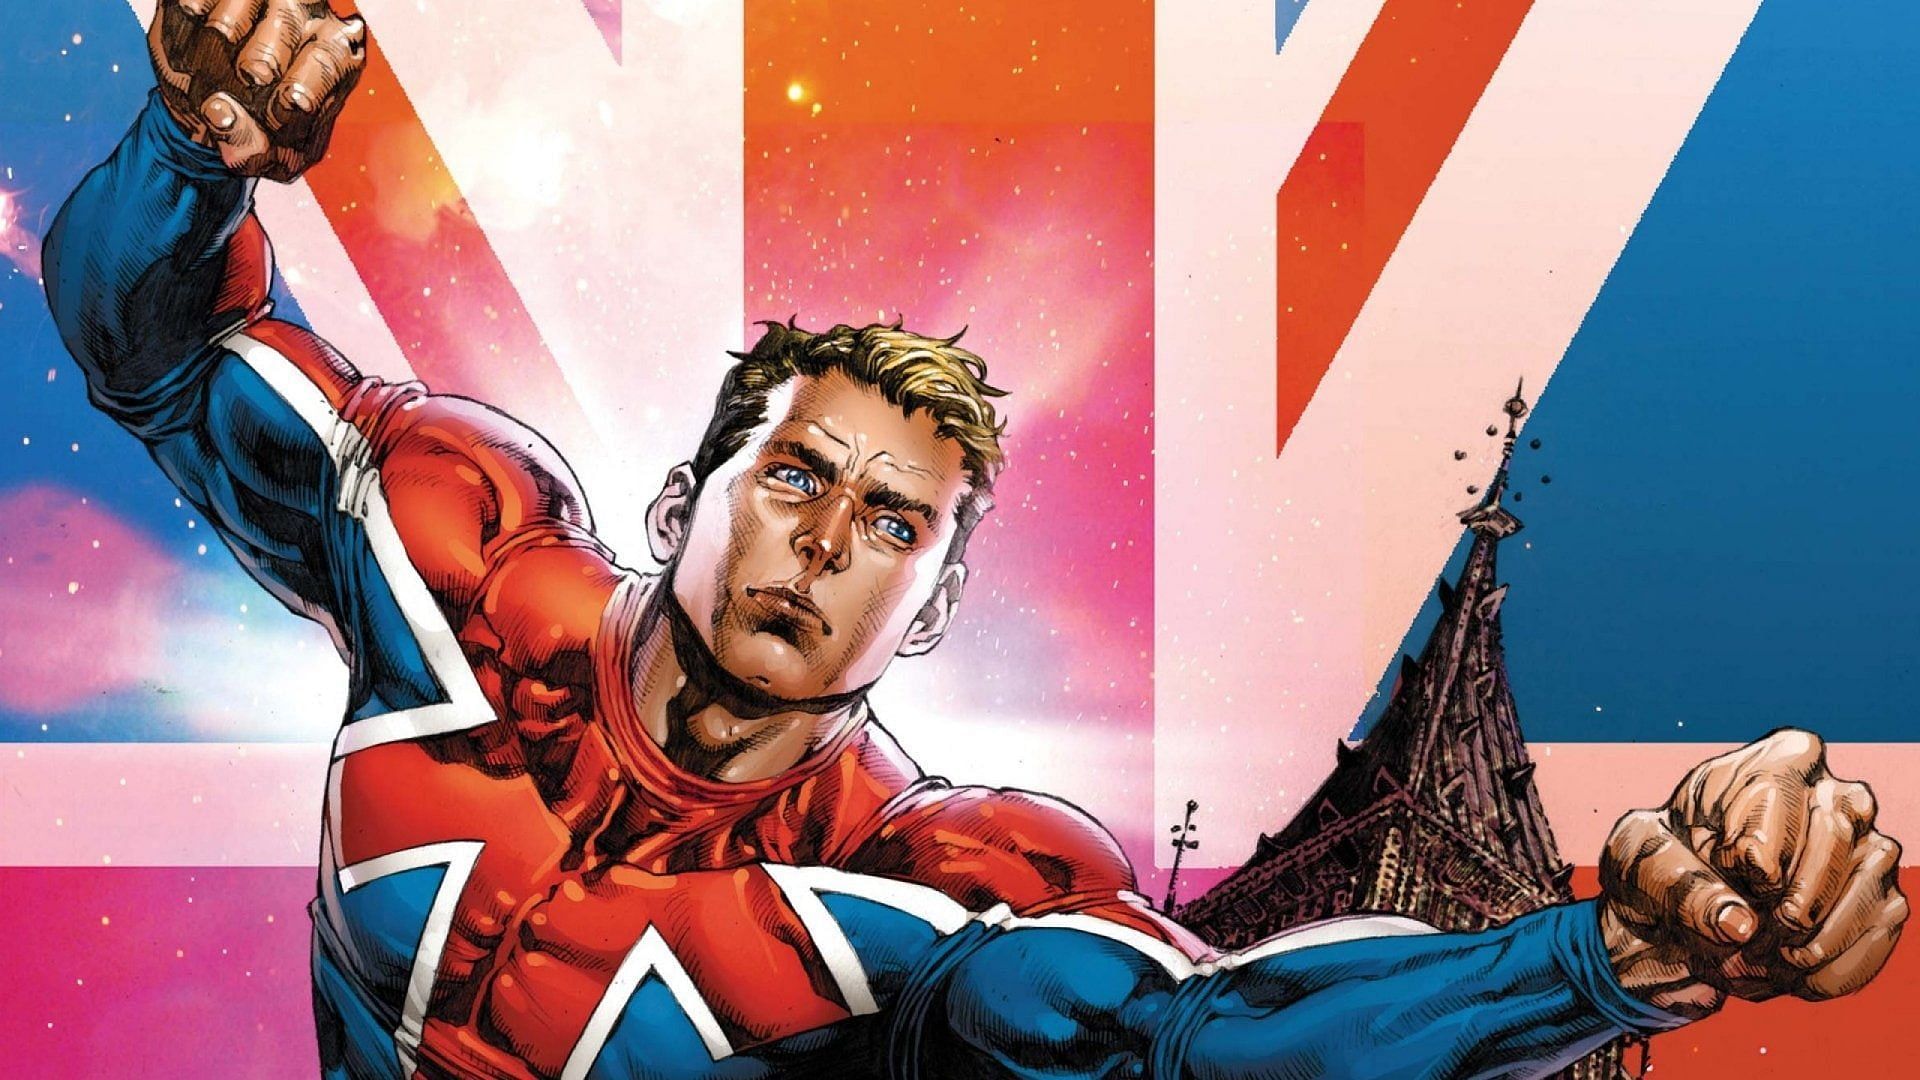 Captain Britain (Brian Braddock) is a valuable asset to the Marvel Cinematic Universe. (Image via Marvel)